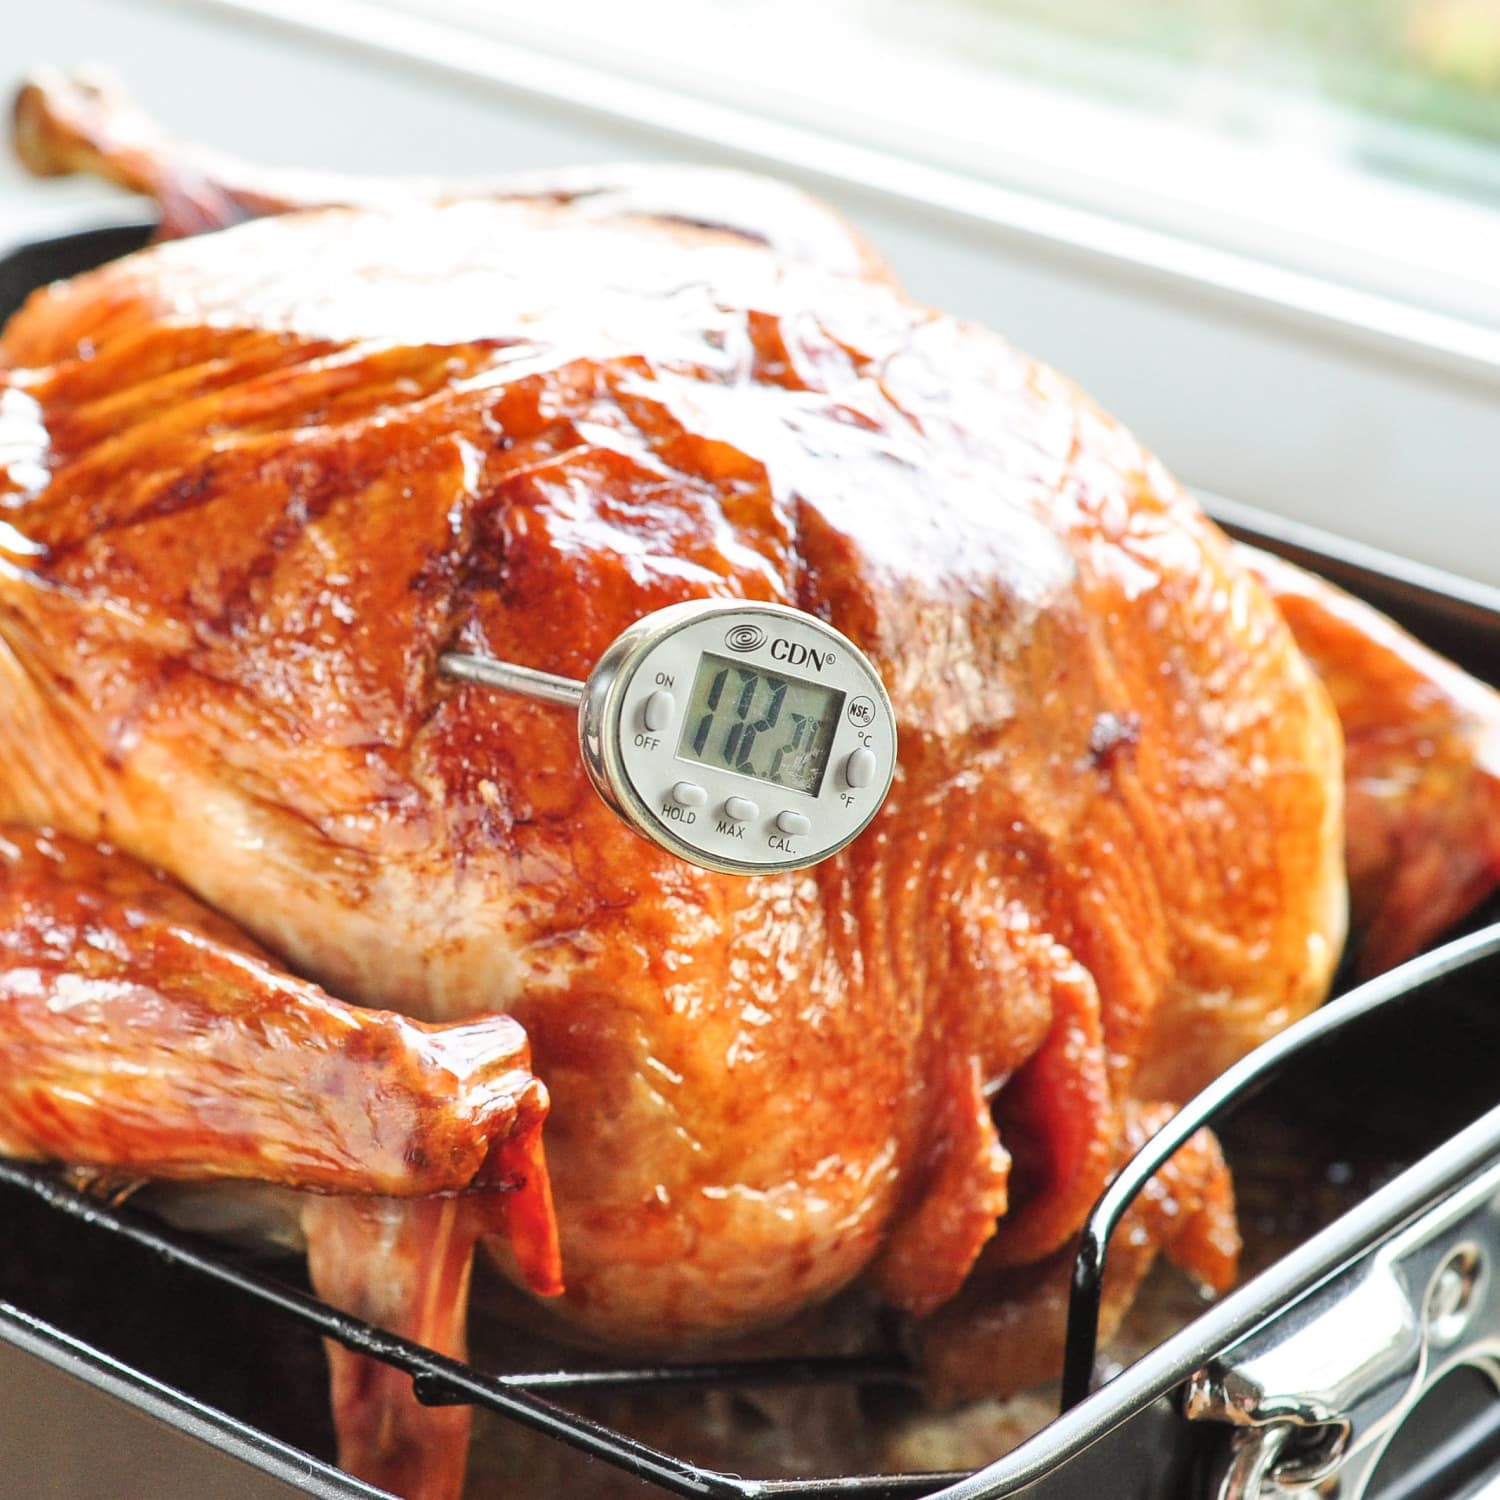 TURKEY THERMOMETER ROAST COOKED TEMPERATURE Cooking meat